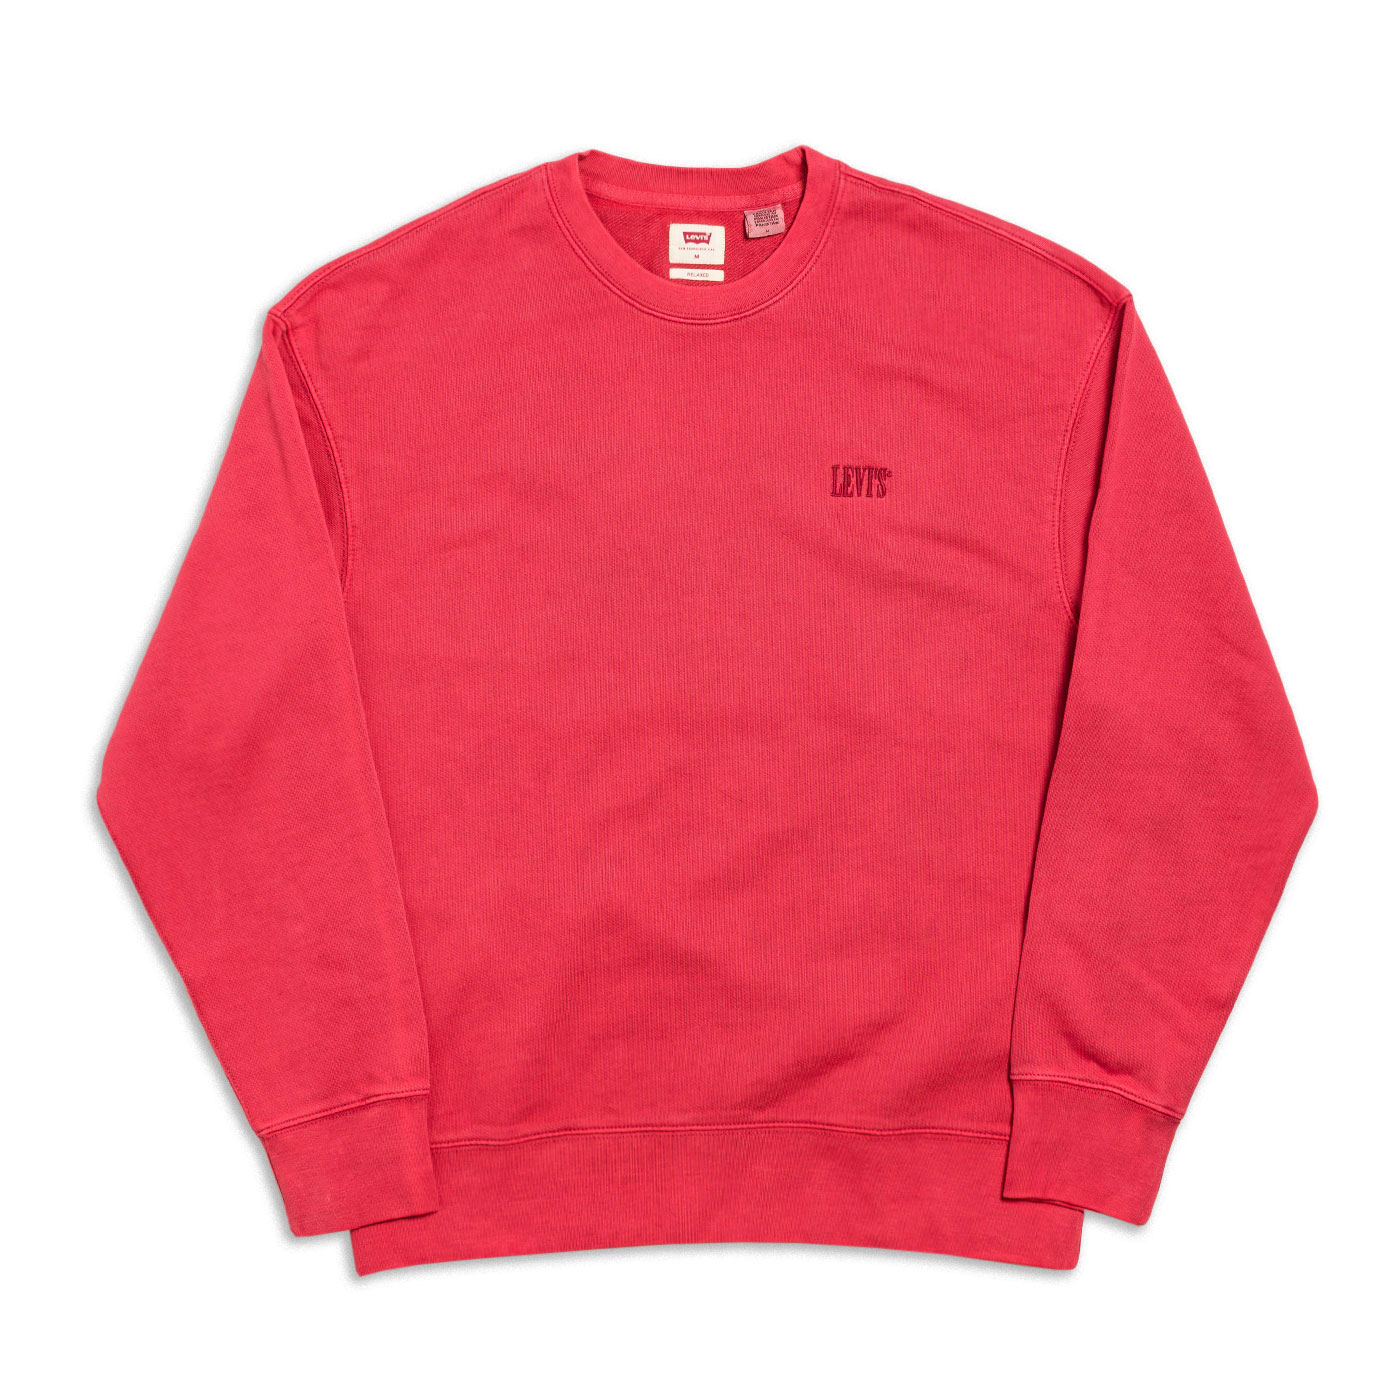 Sweater Levis The Authentic Logo Crewneck Sweatshirt Red for Man |  855310002 